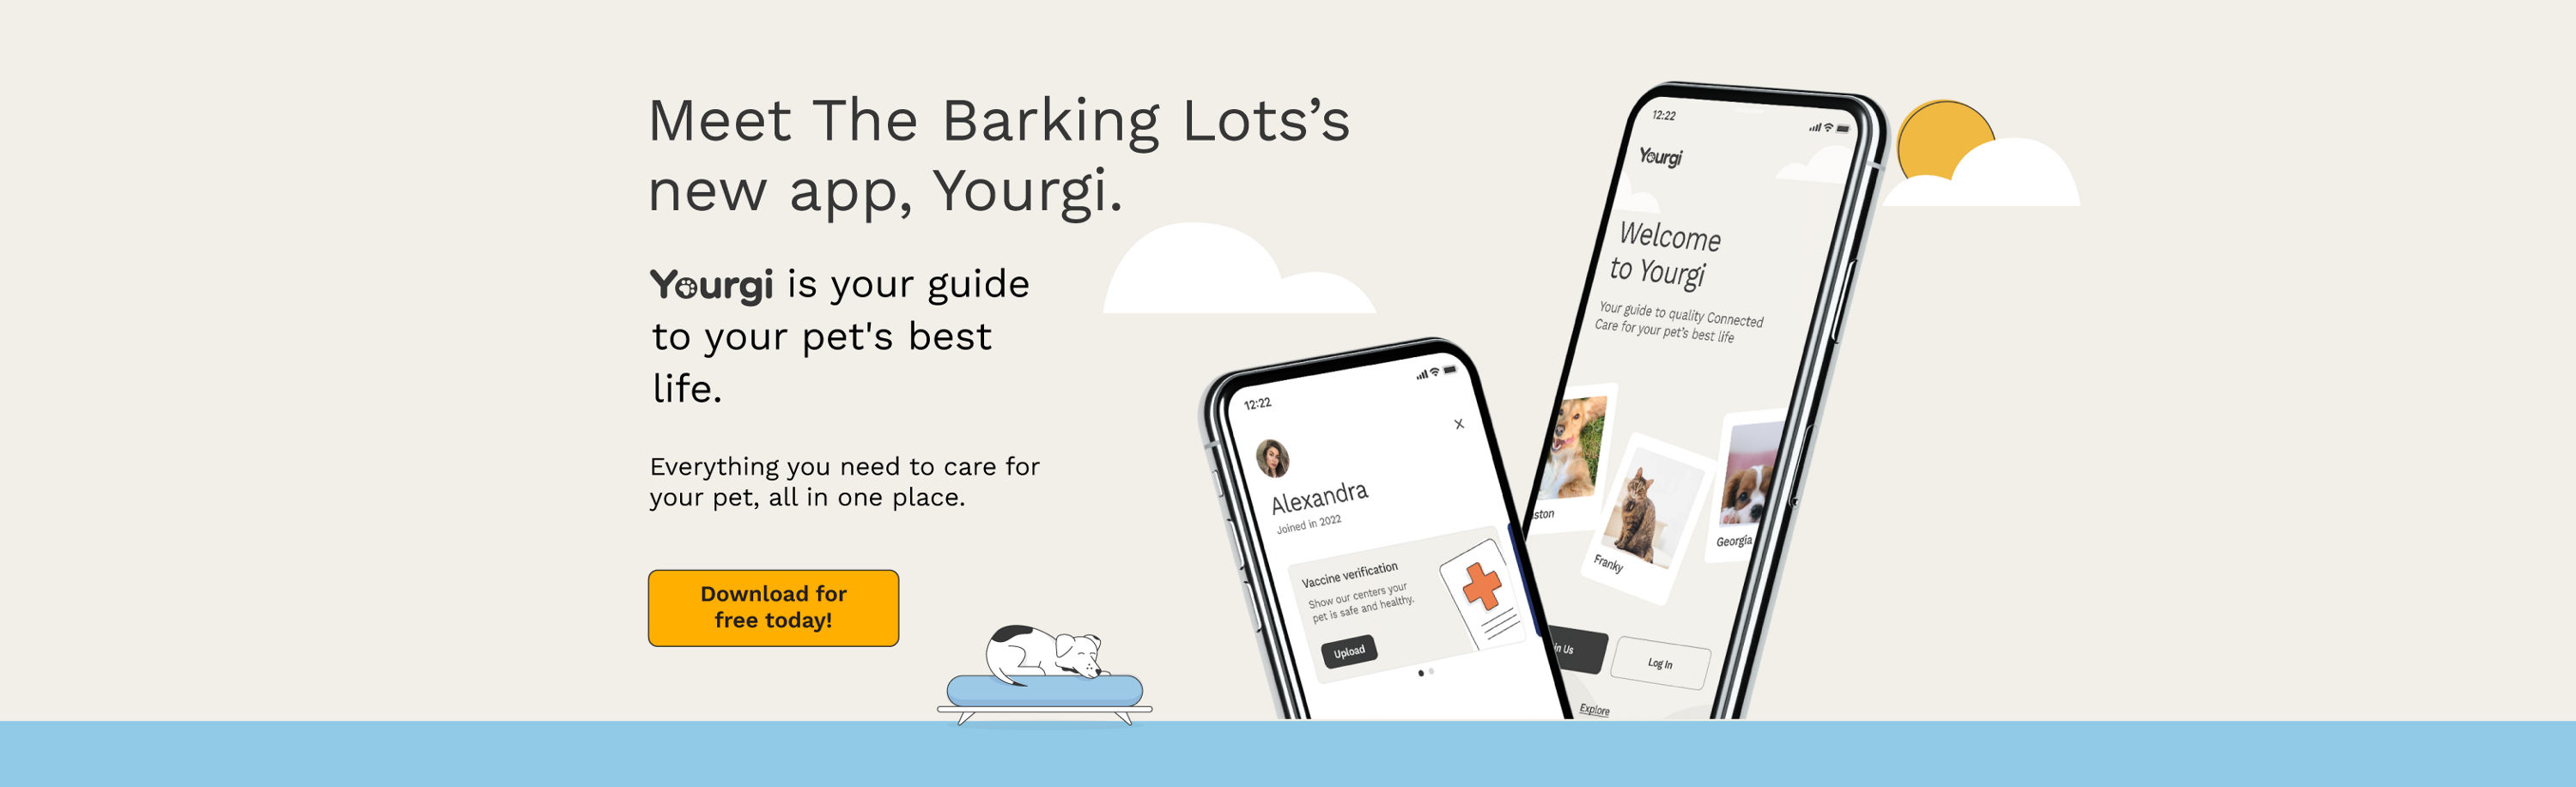 Meet The Barking Lot's new app, Yourgi